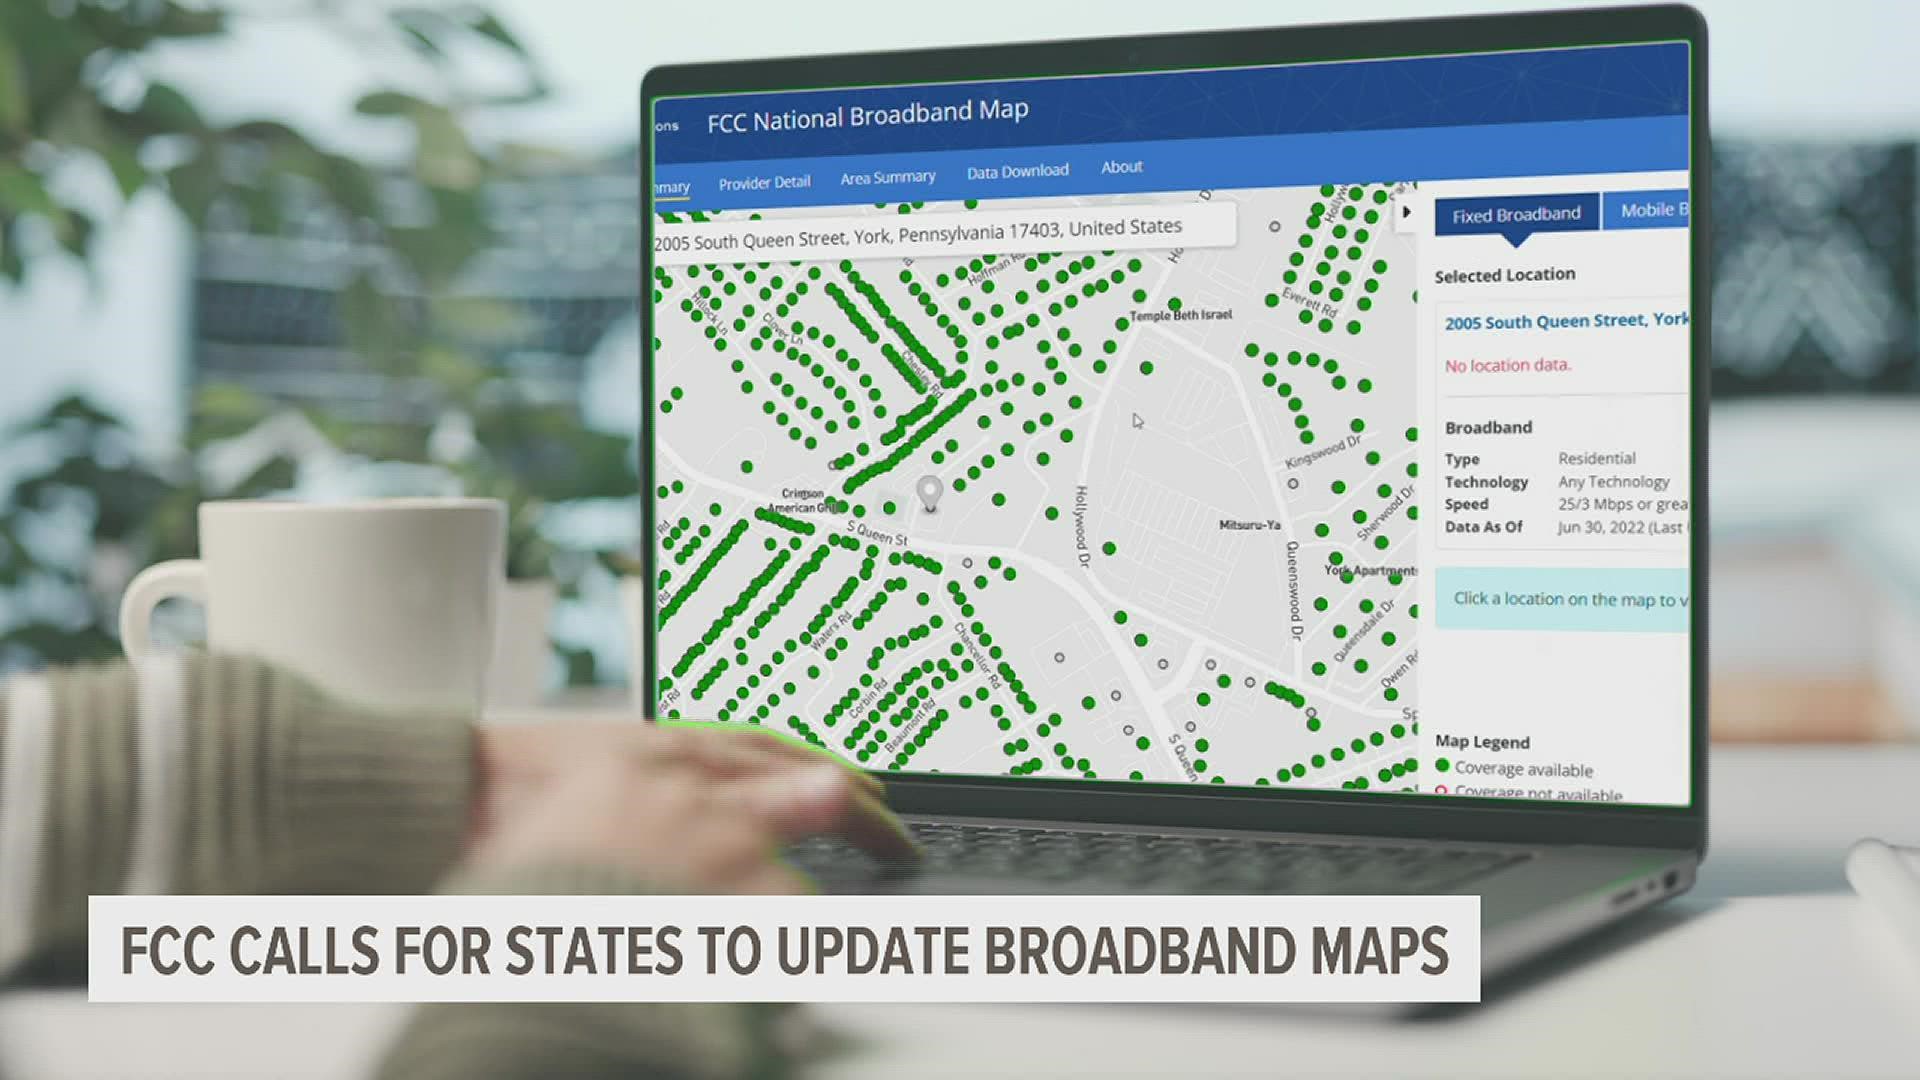 The deadline for the state to provide updated broadband coverage data to the FCC is next month.